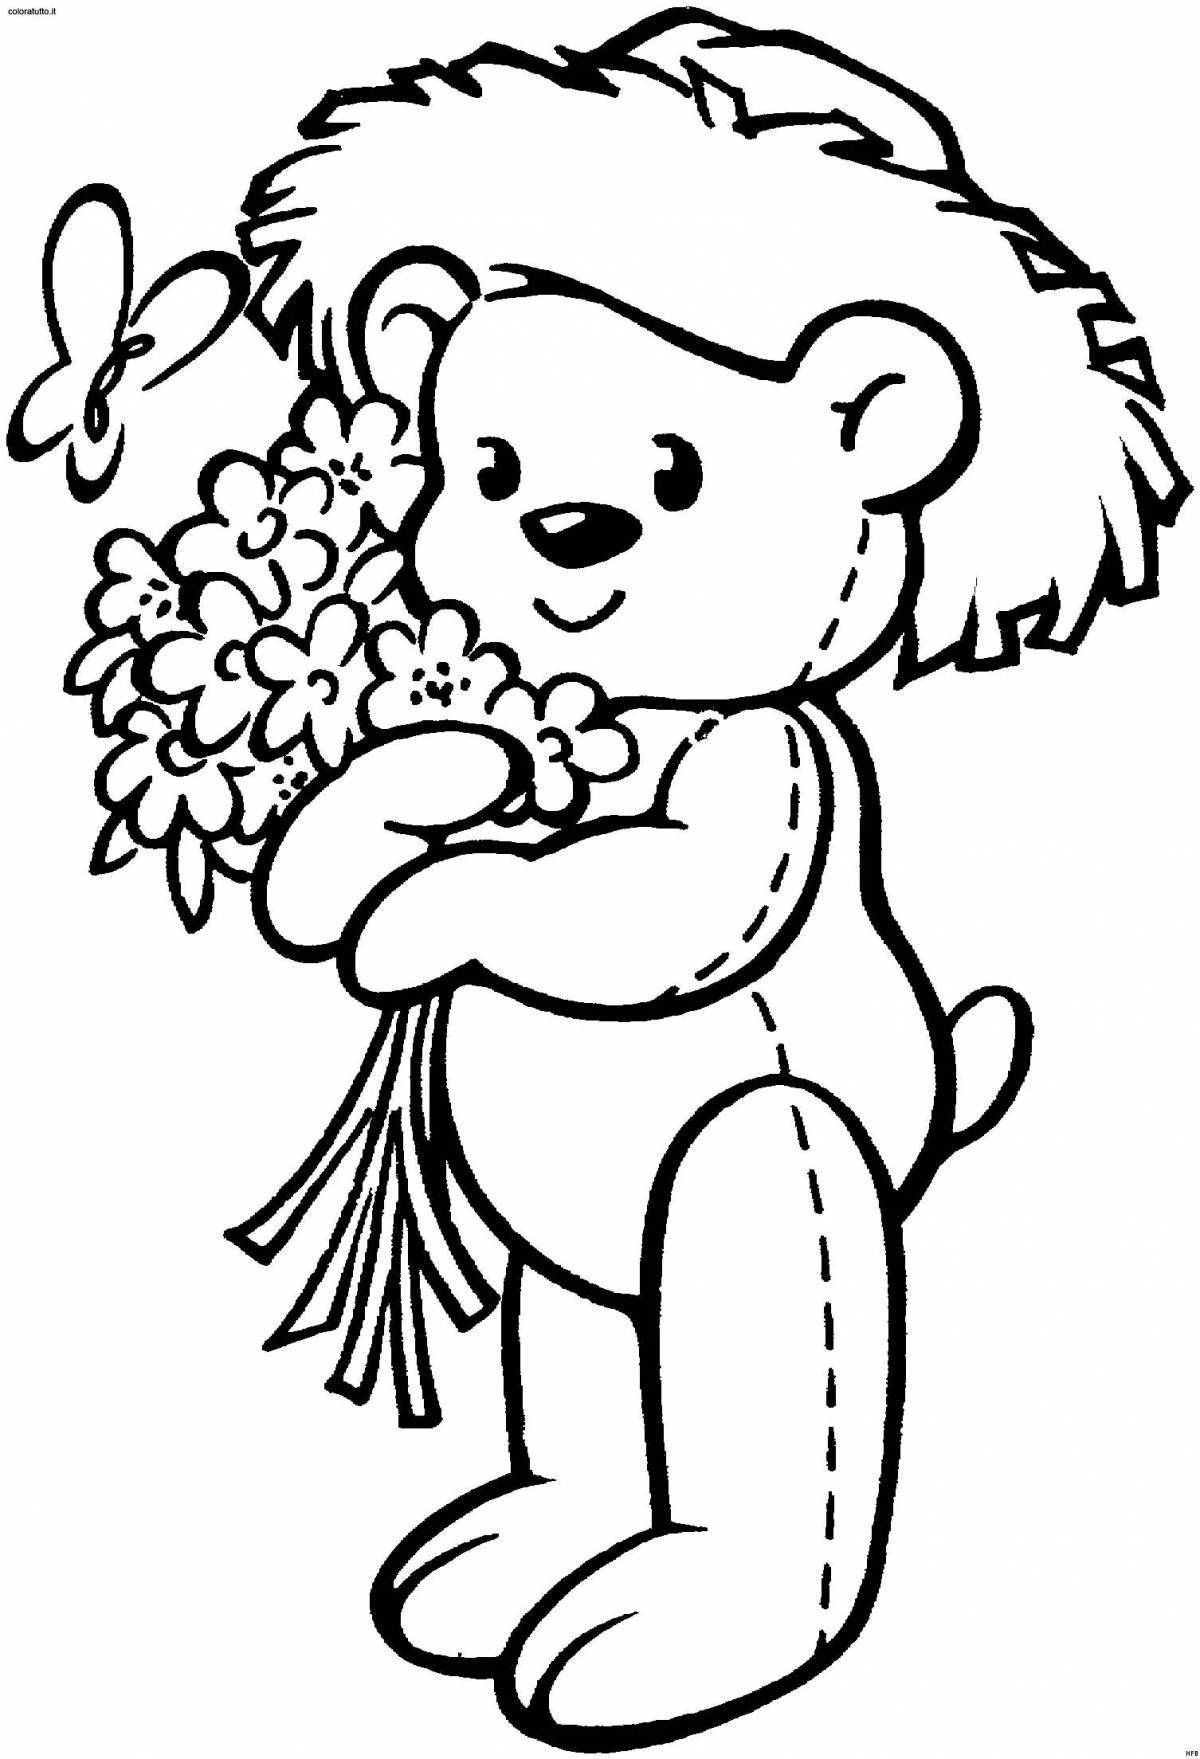 Playful bear with flowers